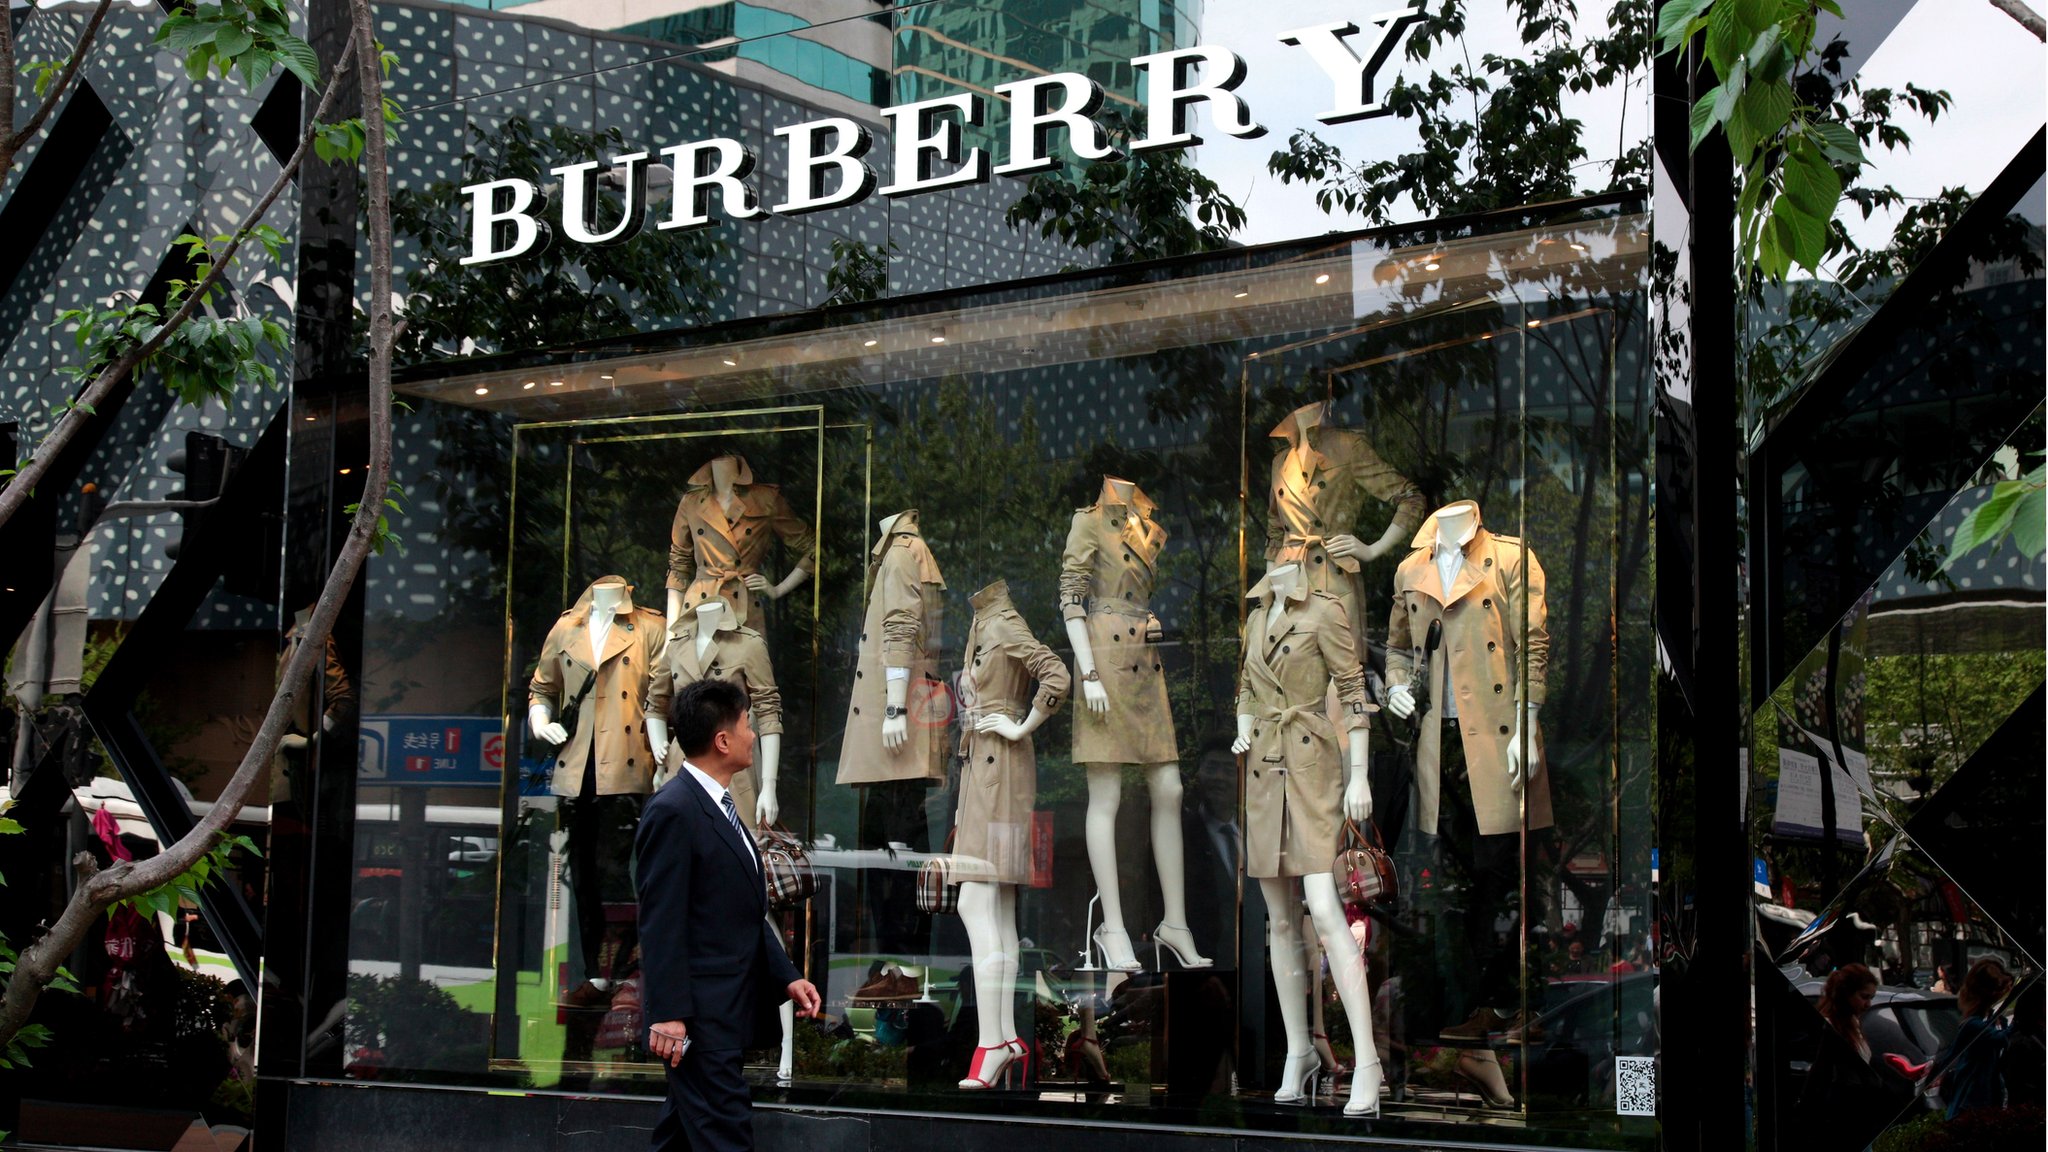 Burberry shares tumble by 8% as China sales disappoint - BBC News